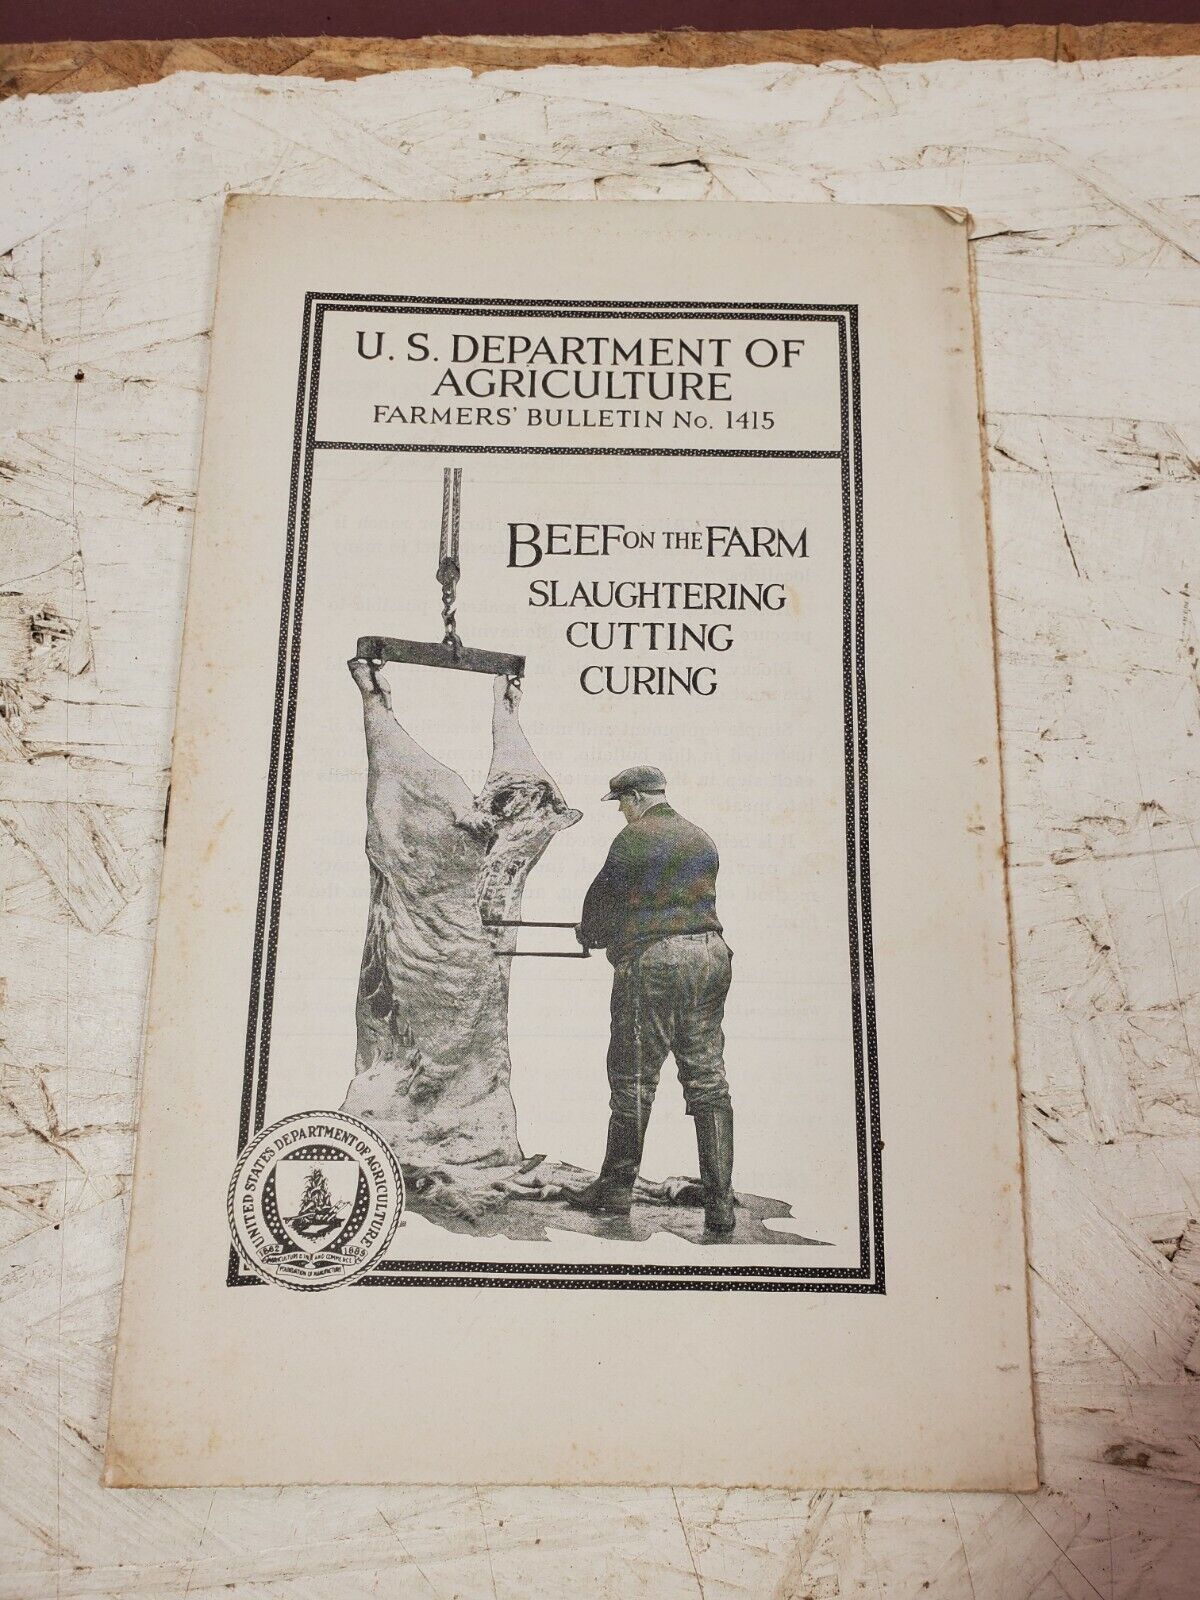 1940 USDA Farmers' Bulletin No. 1415 - Beef on the Farm: Slaughtering, Cutting